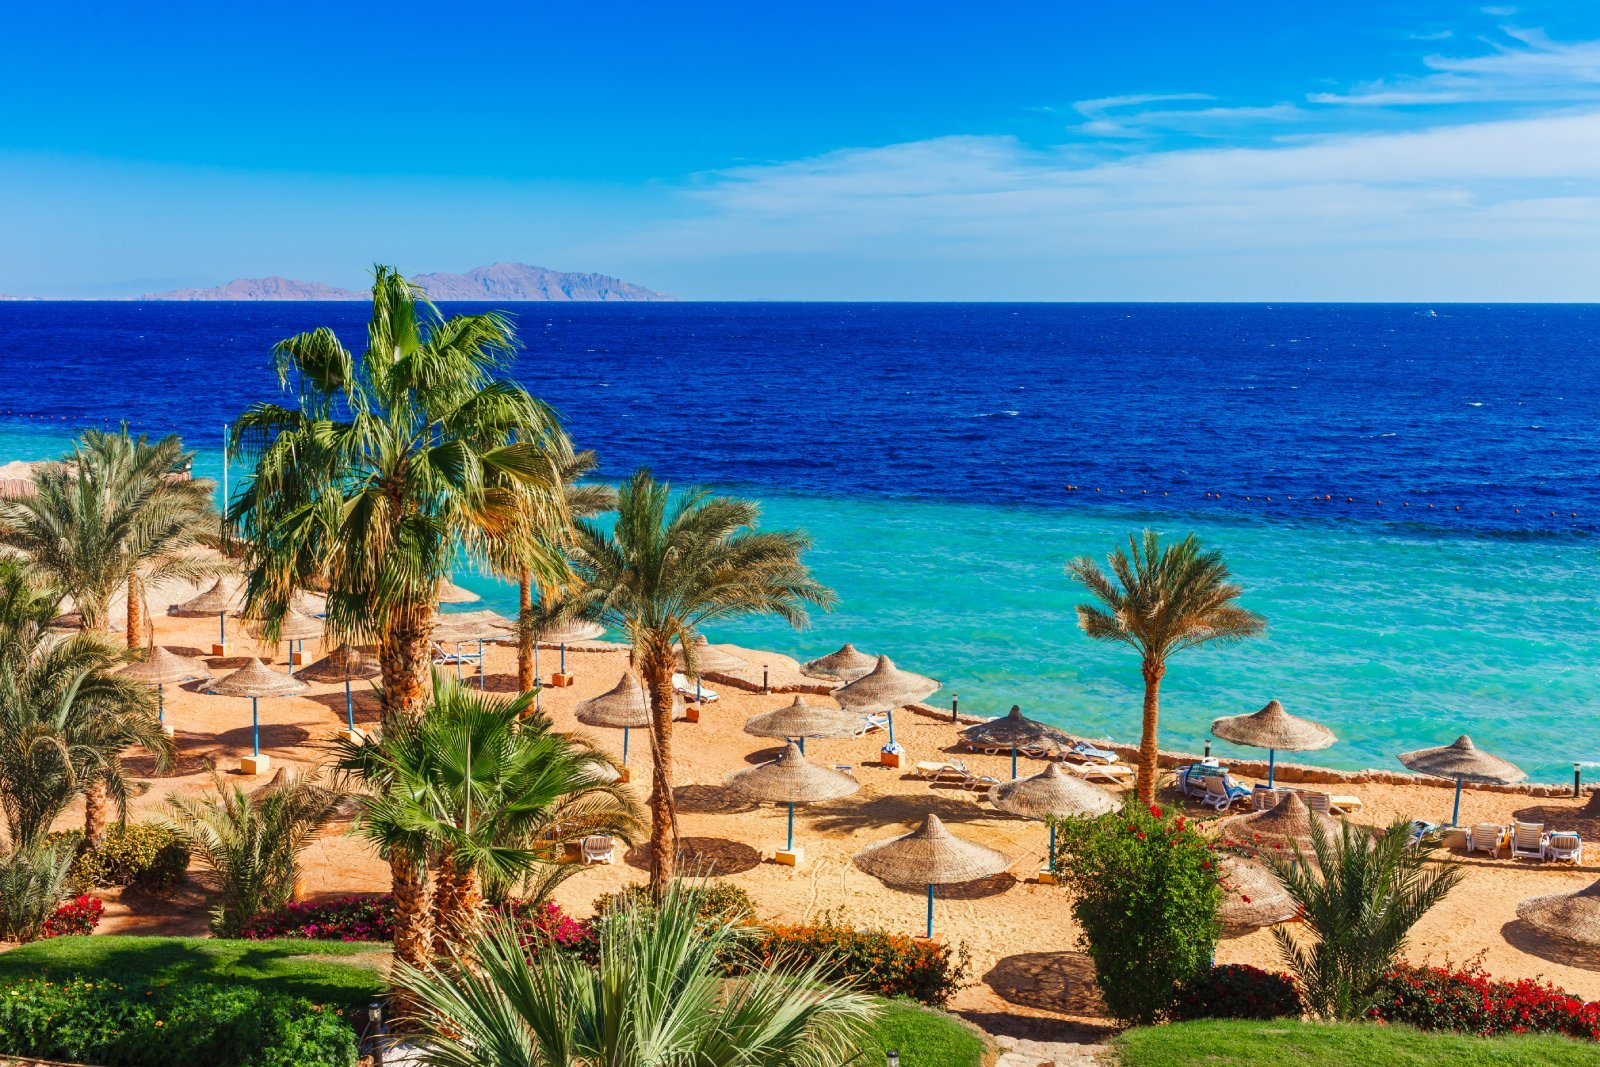 <p class="wp-caption-text">Image Credit: Shutterstock / Oleg_P</p>  <p><span>Hurghada, once a small fishing village on the Red Sea, has transformed into a premier destination for marine life enthusiasts and divers from around the world. Its crystal-clear waters, vibrant coral reefs, and diverse marine species offer spectacular diving and snorkeling experiences. Conservation efforts in the region focus on protecting the delicate coral ecosystems and promoting sustainable tourism practices. Beyond the sea, Hurghada’s desert landscape offers adventure activities such as quad biking and camel safaris, providing a holistic nature experience. The city is also a cultural gateway to Egypt’s ancient wonders, and trips to Luxor and the Valley of the Kings can be easily arranged.</span></p> <p><b>Insider’s Tip:</b><span> Visit the Marine Biology Museum in Hurghada to gain insights into the local marine ecosystem and conservation efforts before diving into the Red Sea.</span></p> <p><b>When to Travel:</b><span> The ideal time to visit is from April to June and September to November when the weather is warm but not excessively hot, and the water conditions are perfect for diving.</span></p> <p><b>How to Get There:</b><span> Hurghada International Airport receives direct flights from several European cities and domestic flights from Cairo. Taxis and shuttle services are available for transfers to the city and resorts.</span></p>